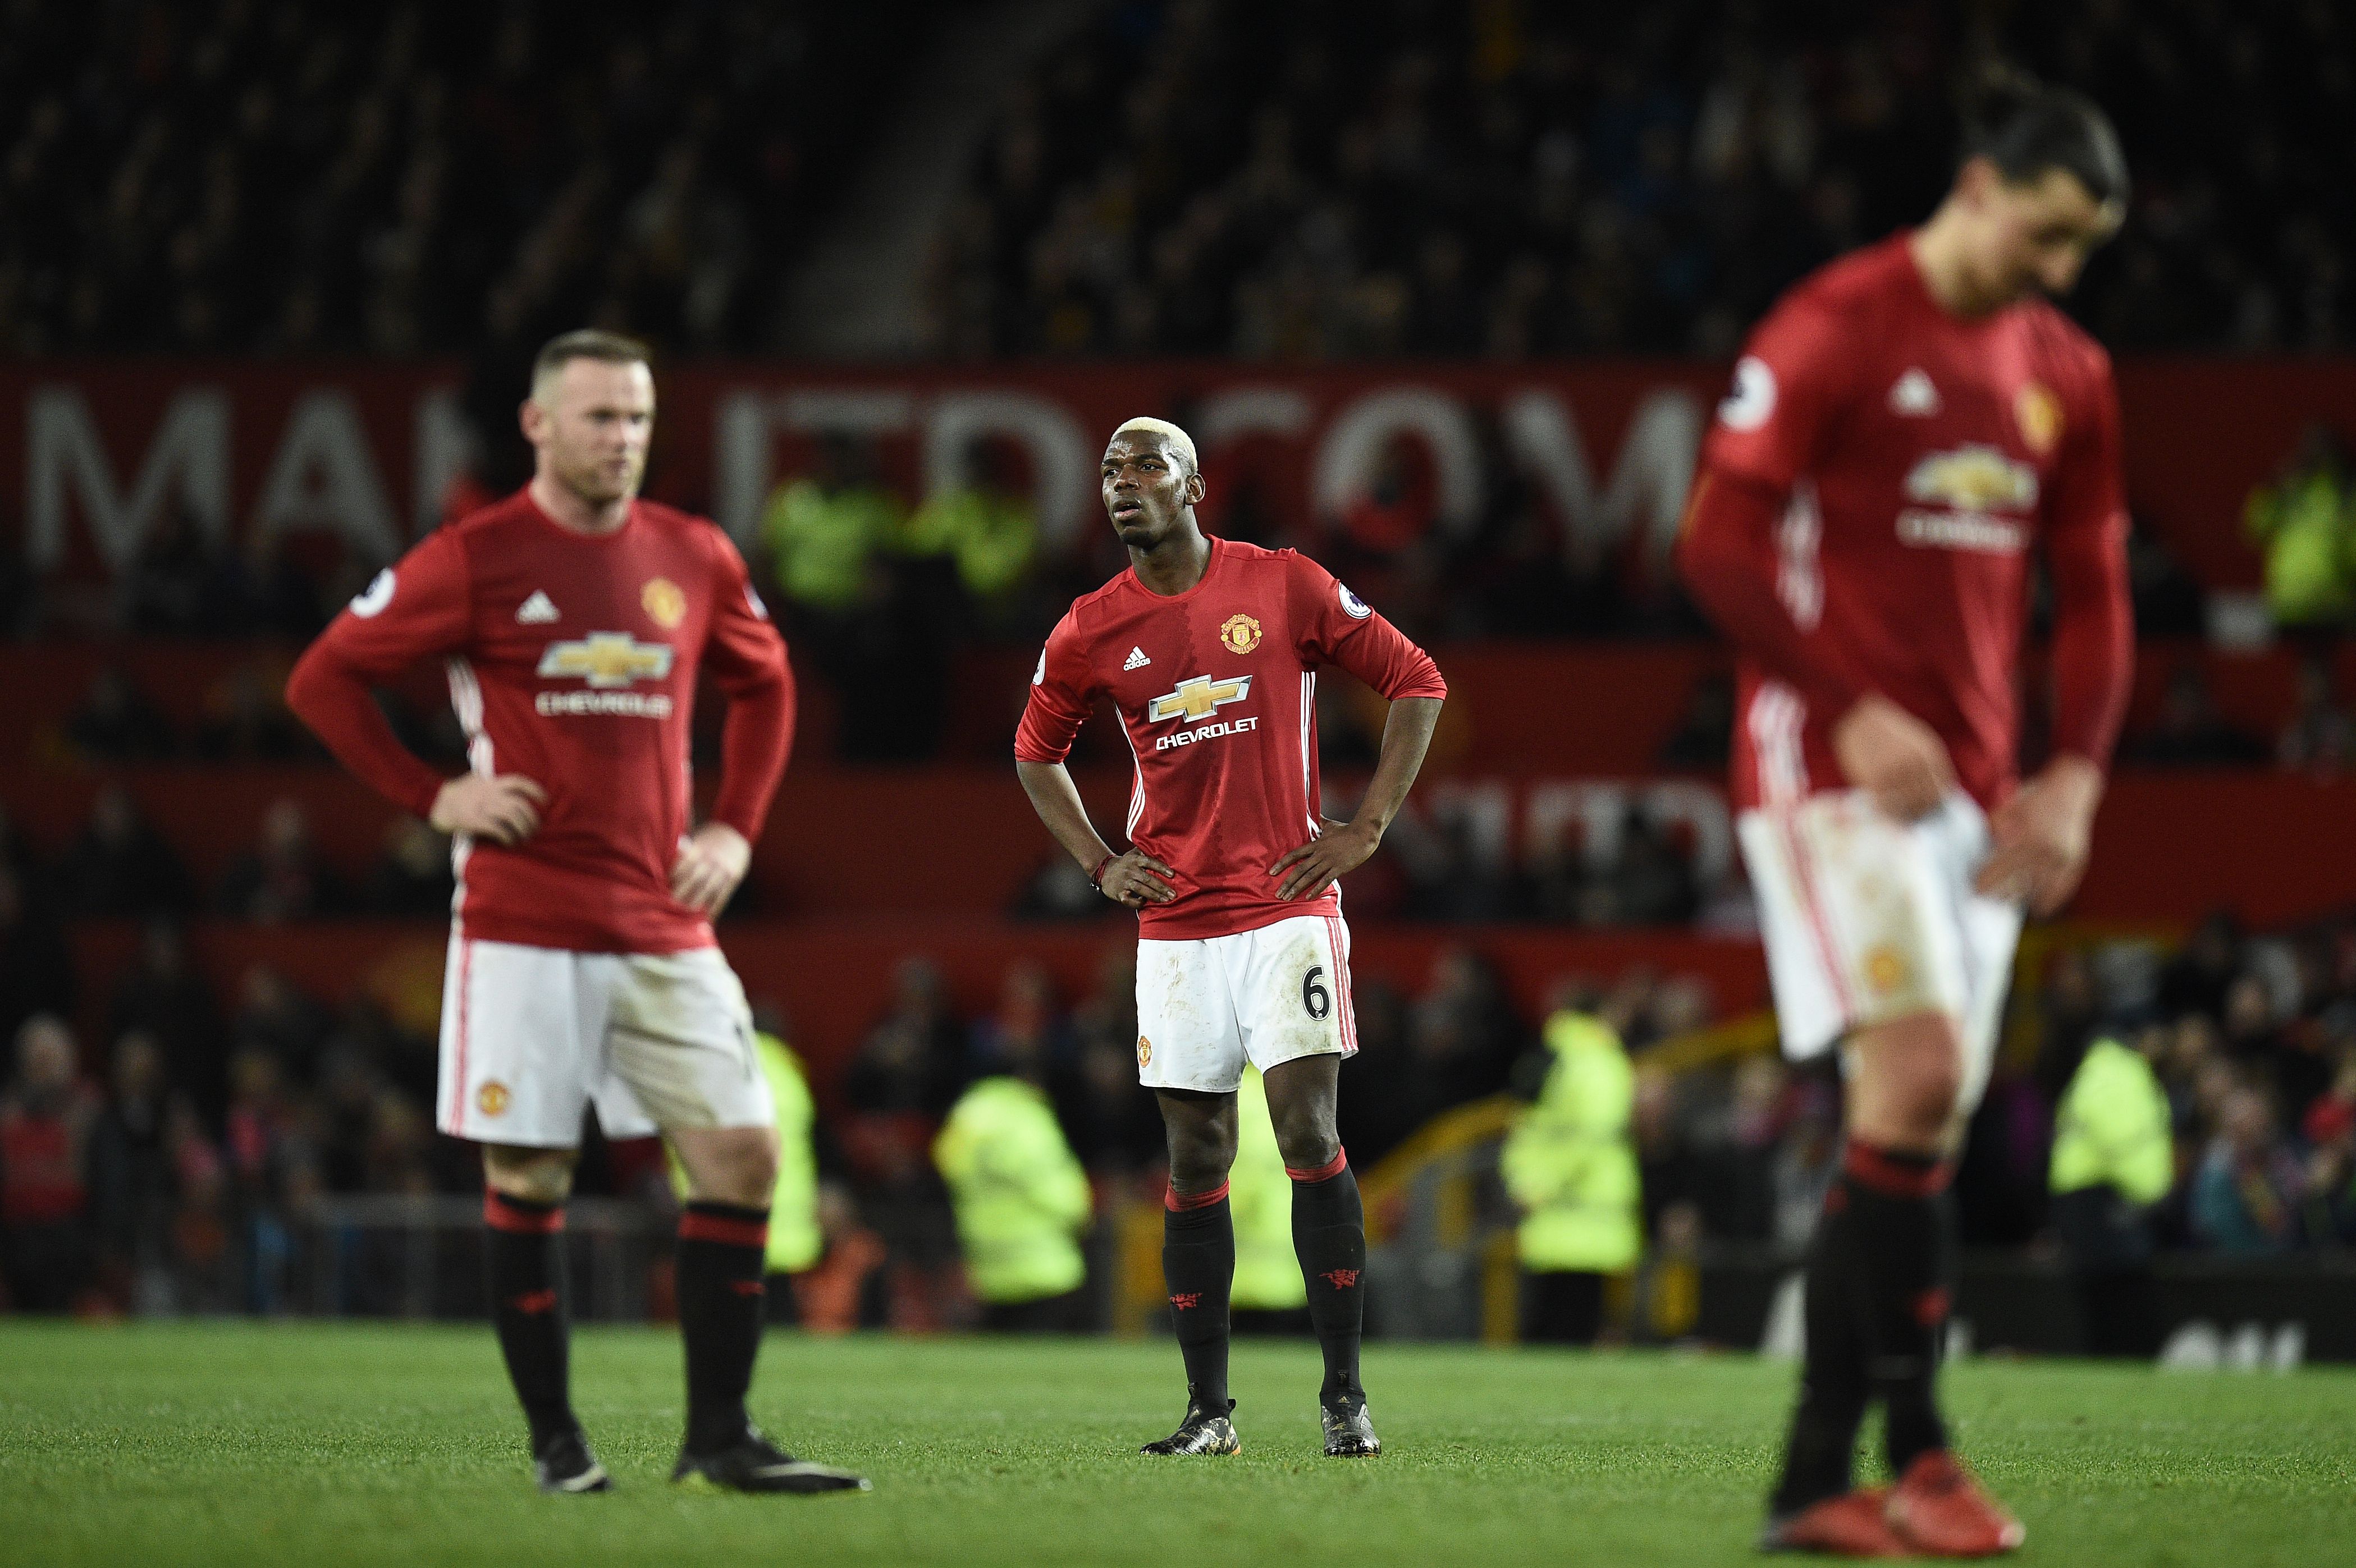 Manchester United's English striker Wayne Rooney (L) Manchester United's French midfielder Paul Pogba and Manchester United's Swedish striker Zlatan Ibrahimovic react following the English Premier League football match between Manchester United and Hull City at Old Trafford in Manchester, north west England, on February 1, 2017.
The match ended in a draw at 0-0. / AFP / Oli SCARFF / RESTRICTED TO EDITORIAL USE. No use with unauthorized audio, video, data, fixture lists, club/league logos or 'live' services. Online in-match use limited to 75 images, no video emulation. No use in betting, games or single club/league/player publications.  /         (Photo credit should read OLI SCARFF/AFP/Getty Images)